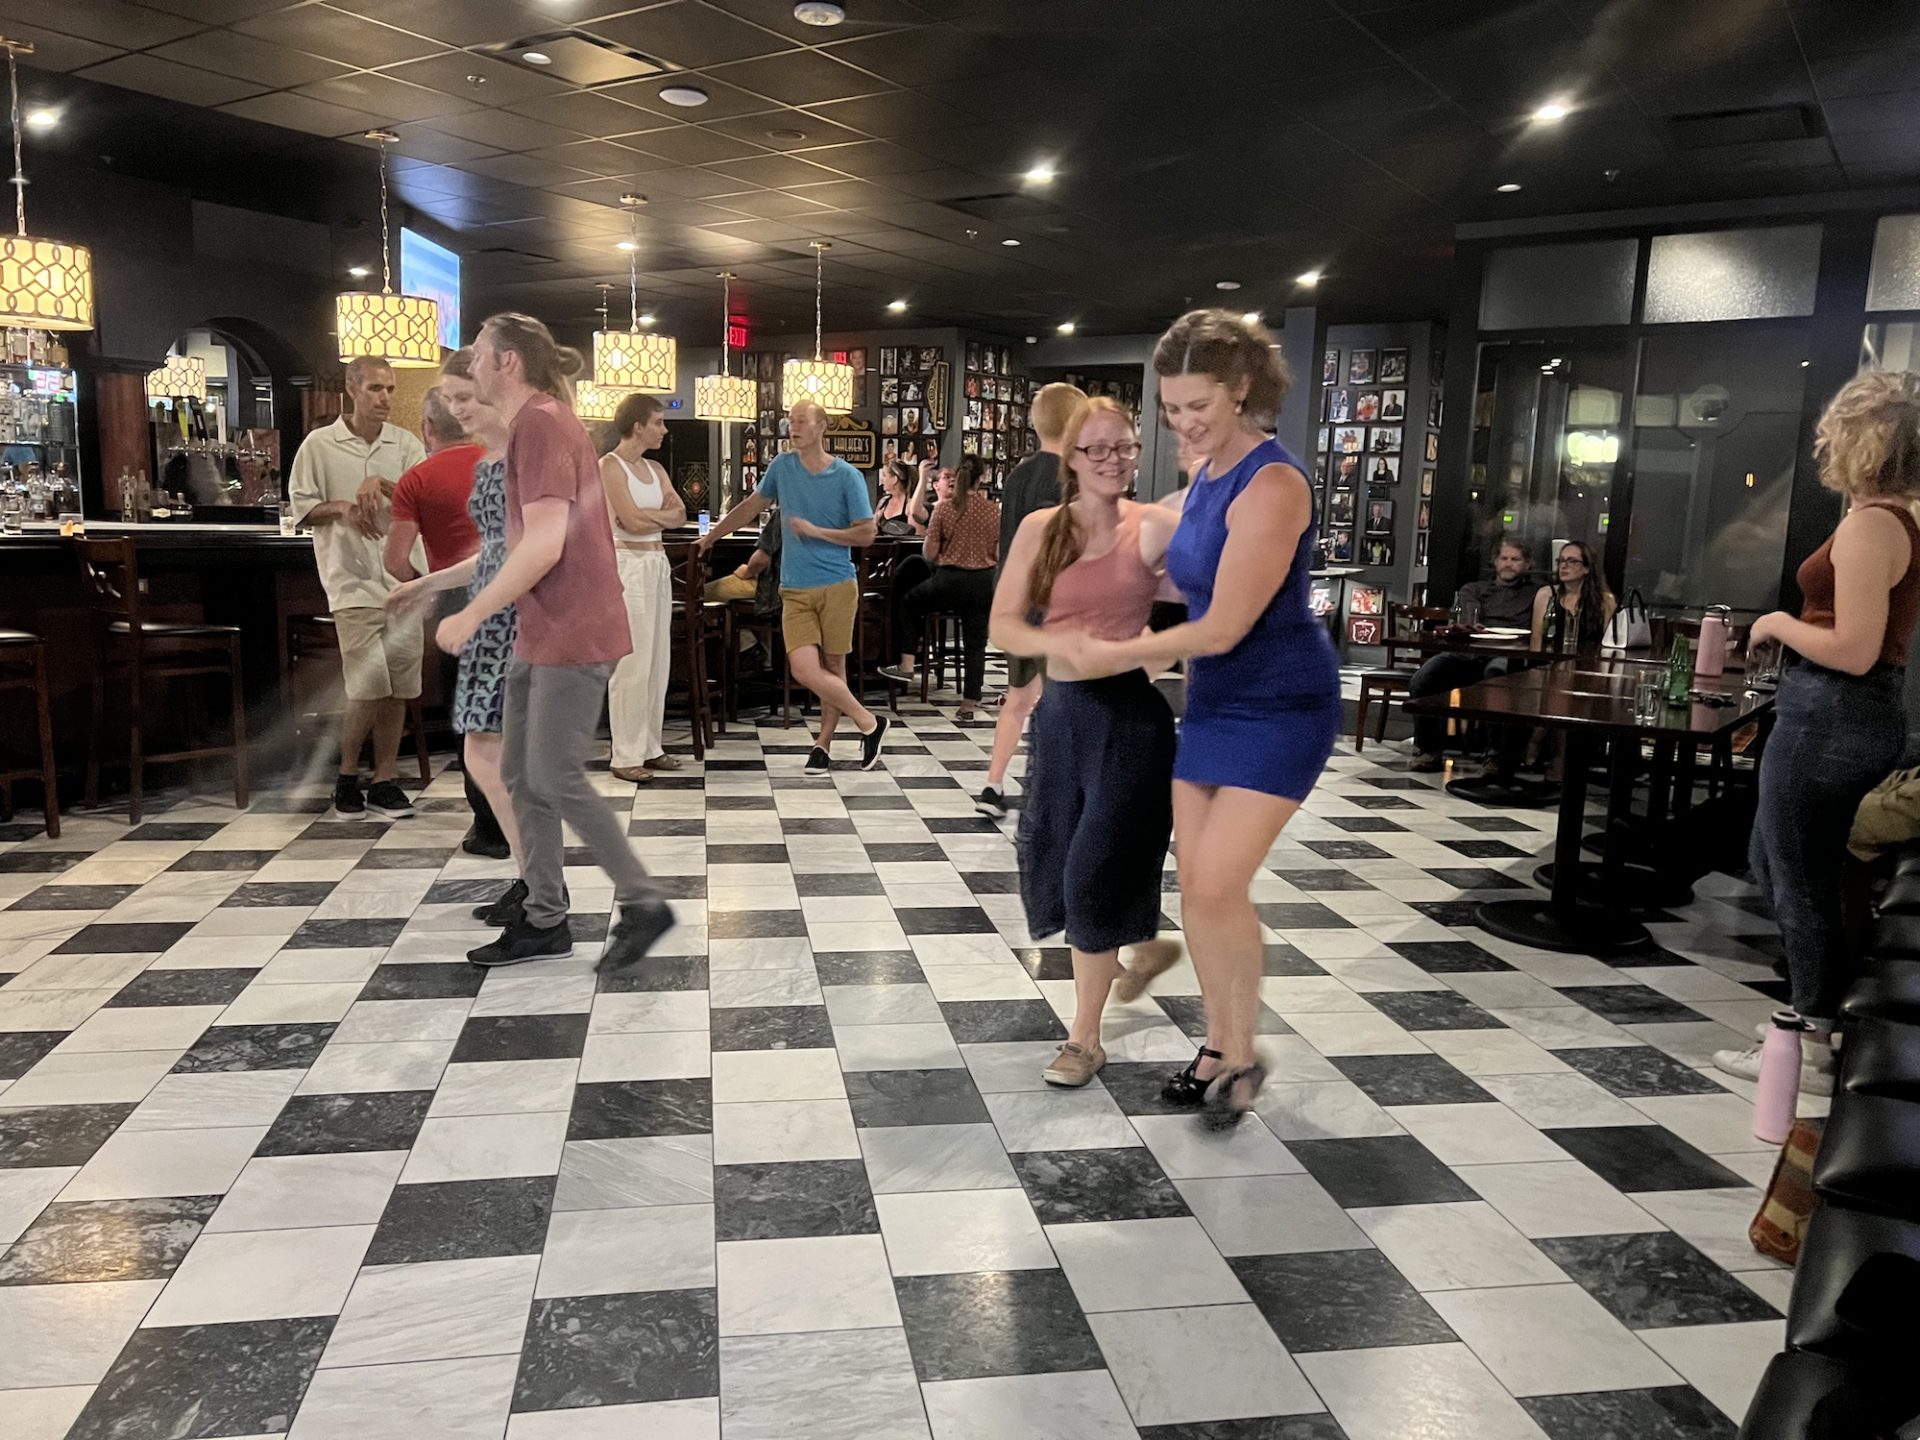 Lindy Hop at Hamilton Walker’s is a relaxed and inviting social dance experience